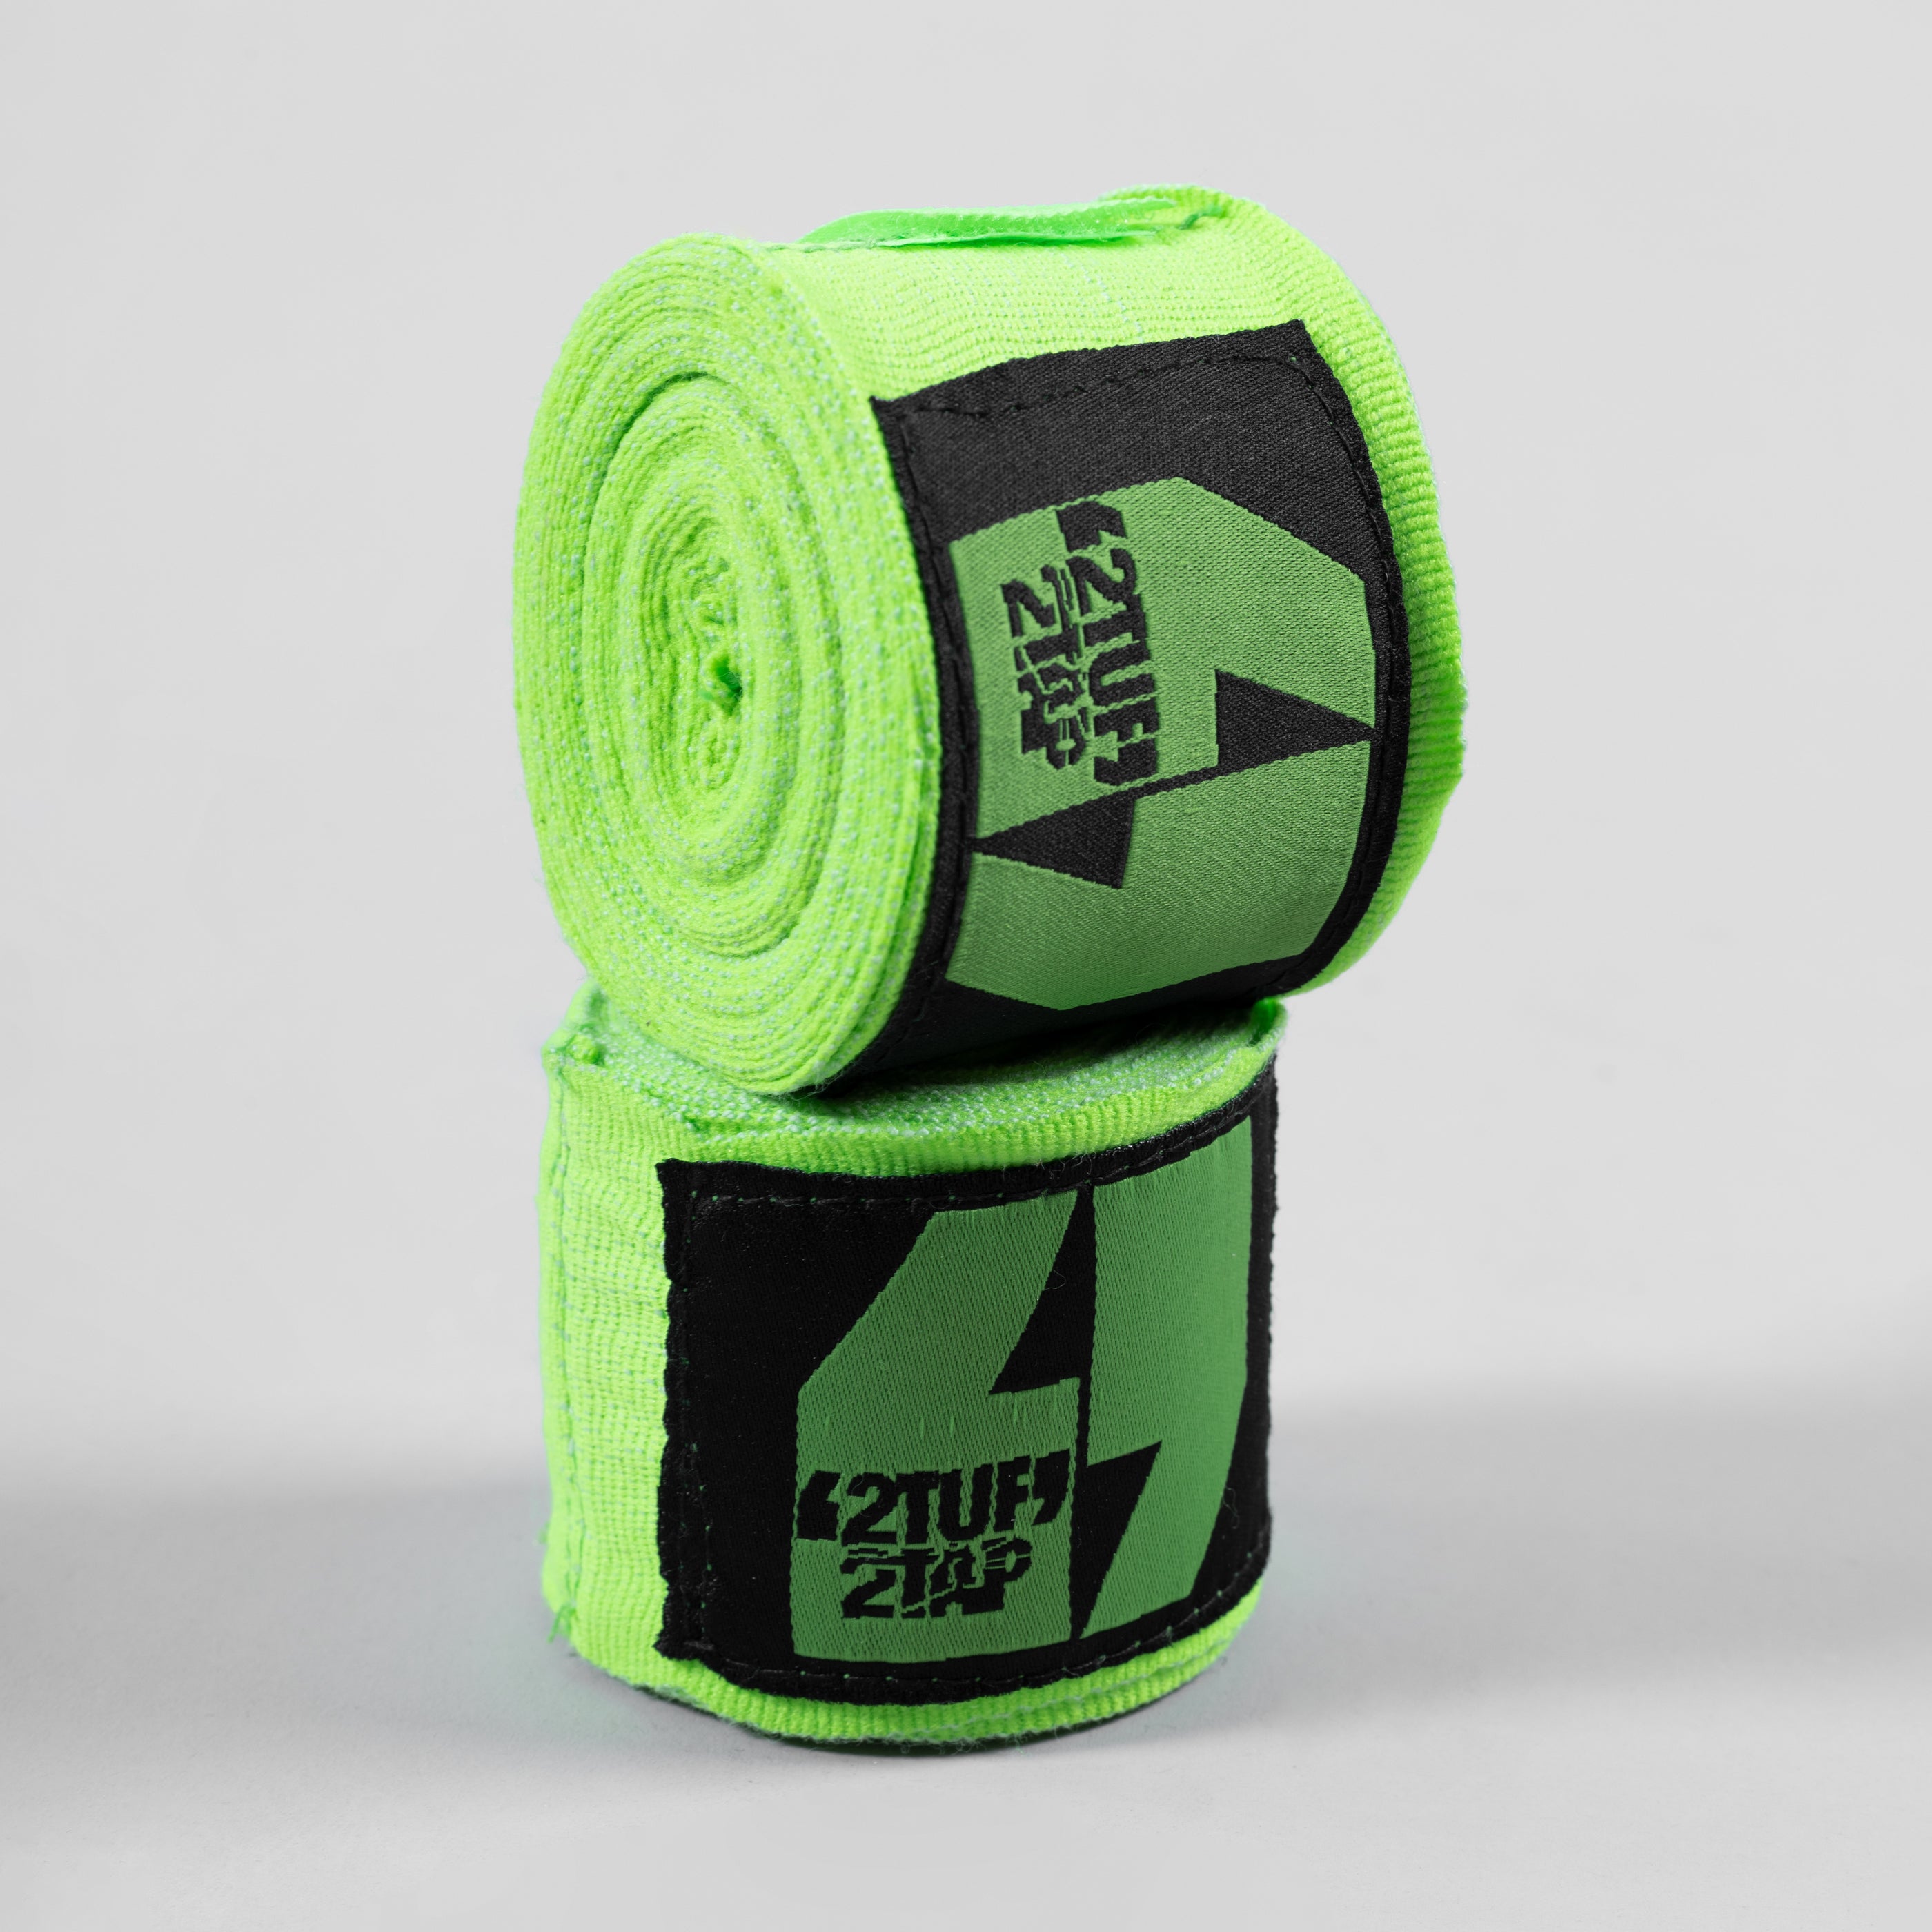 'Strykr' Boxing Hand Wraps - Green/Black 2TUF2TAP